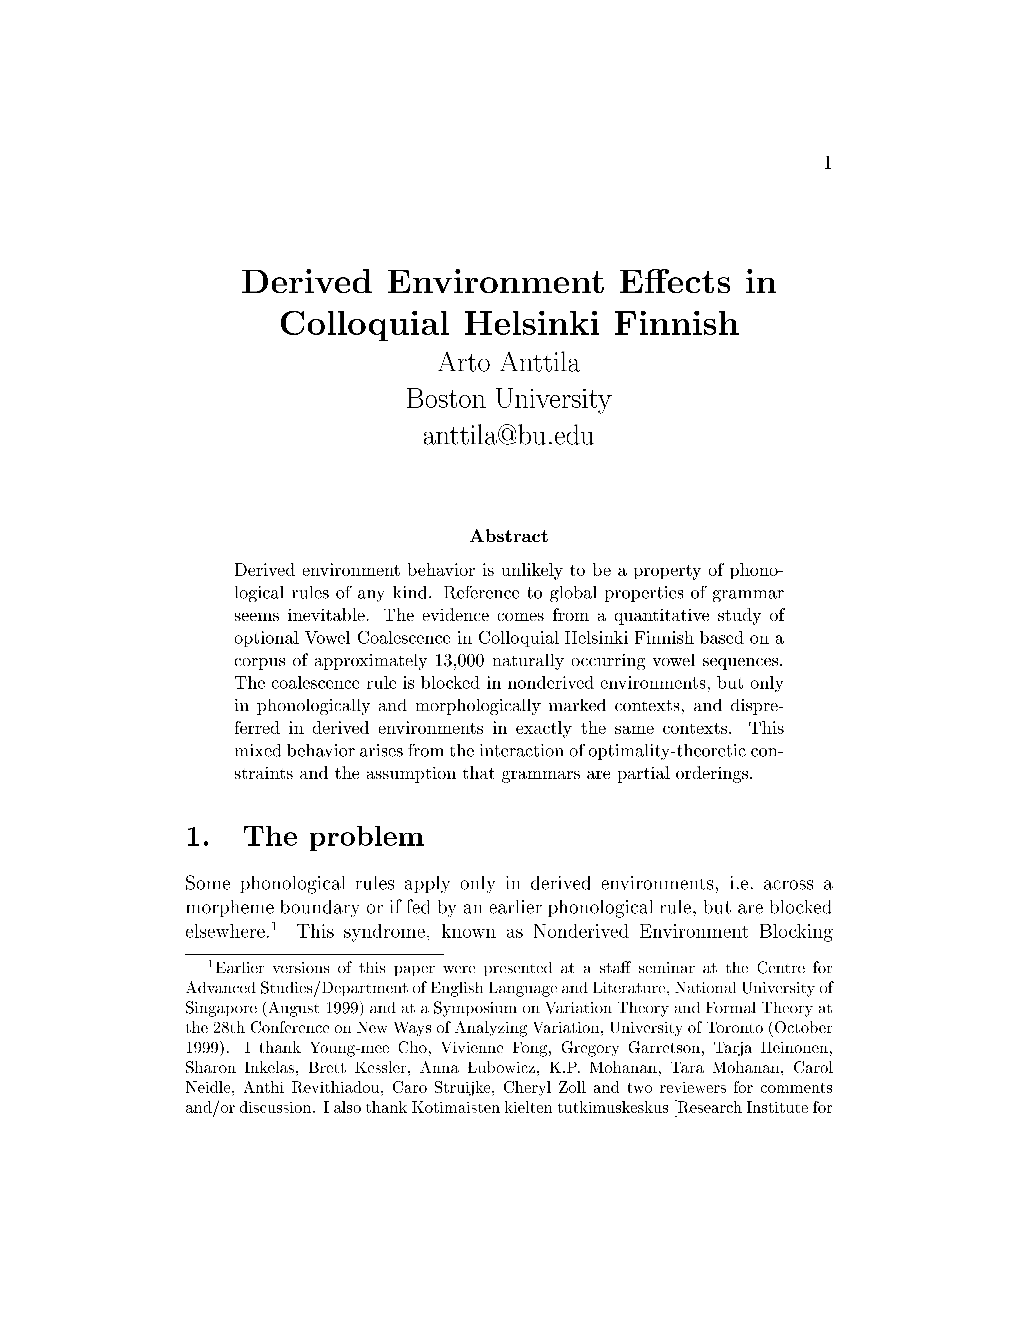 Derived Environment Effects in Colloquial Helsinki Finnish